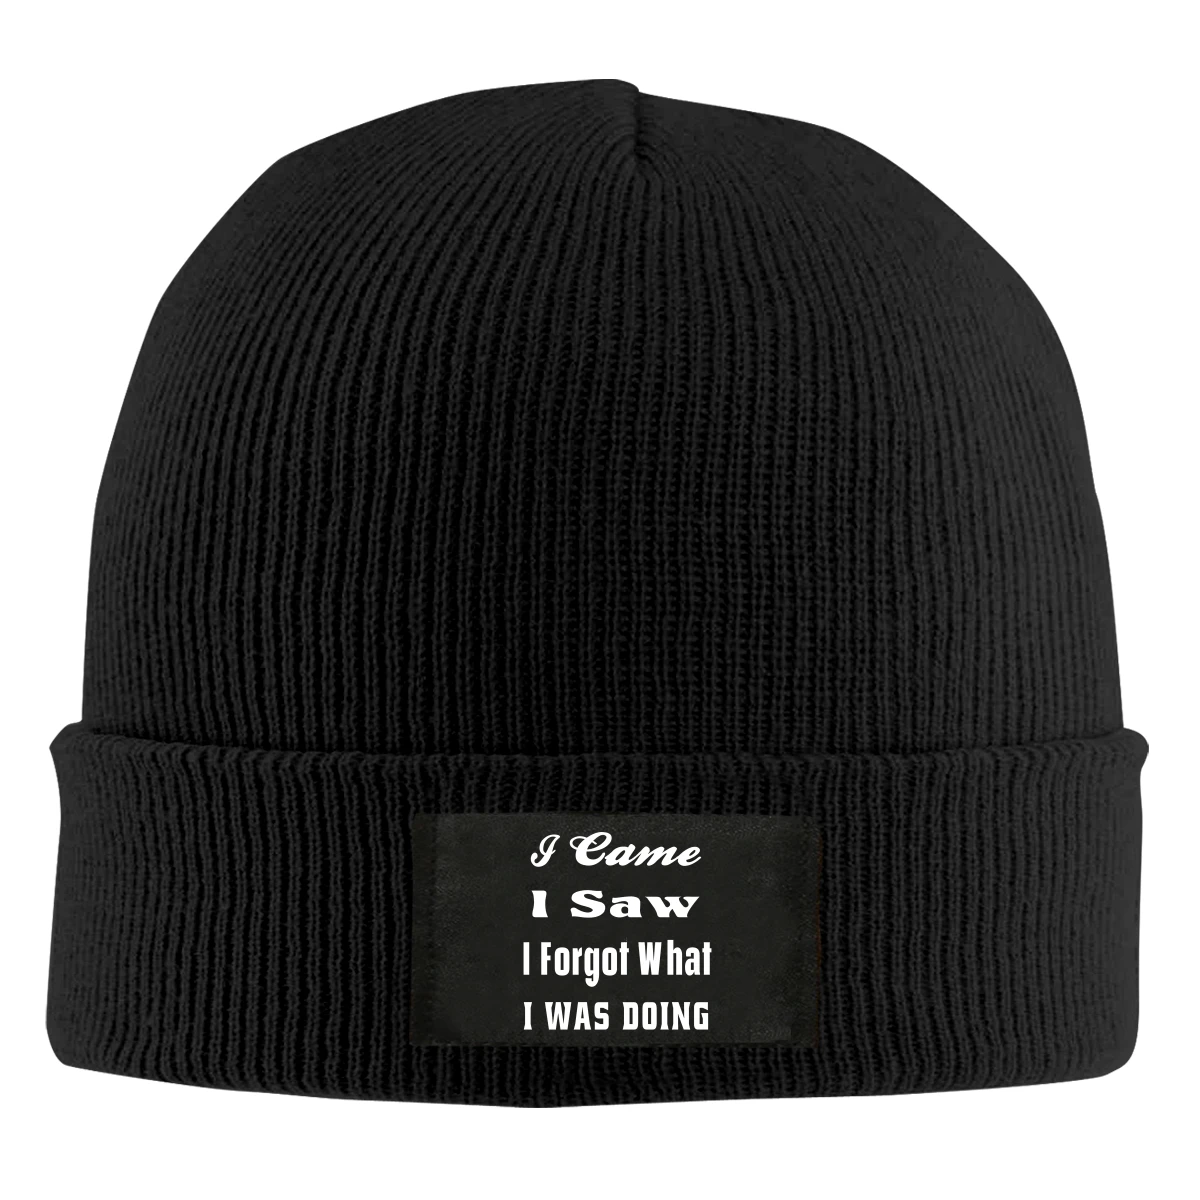 

I Came I Saw I Forgot What I Was Doing Beanie Hats For Men Women With Designs Winter Slouchy Knit Skull Cap